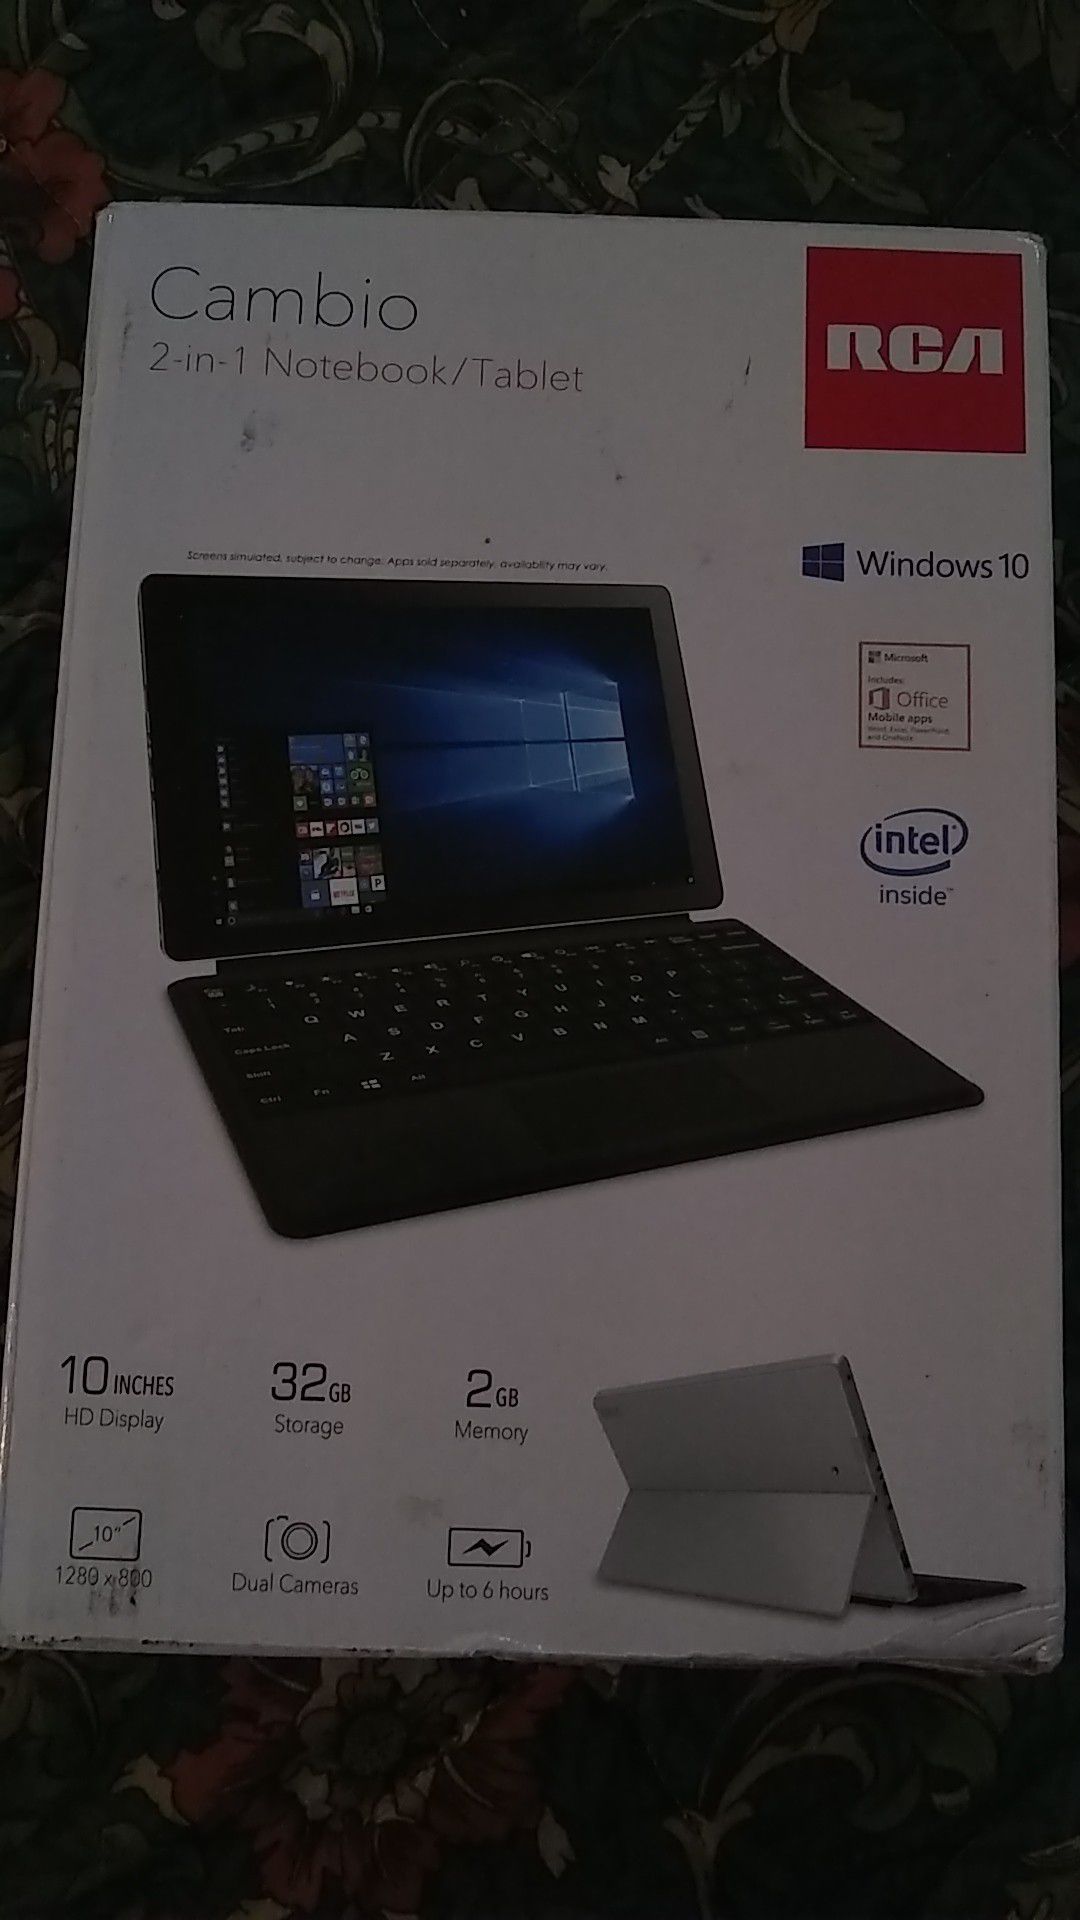 RCA Cambio 2 in 1 notebook/Tablet